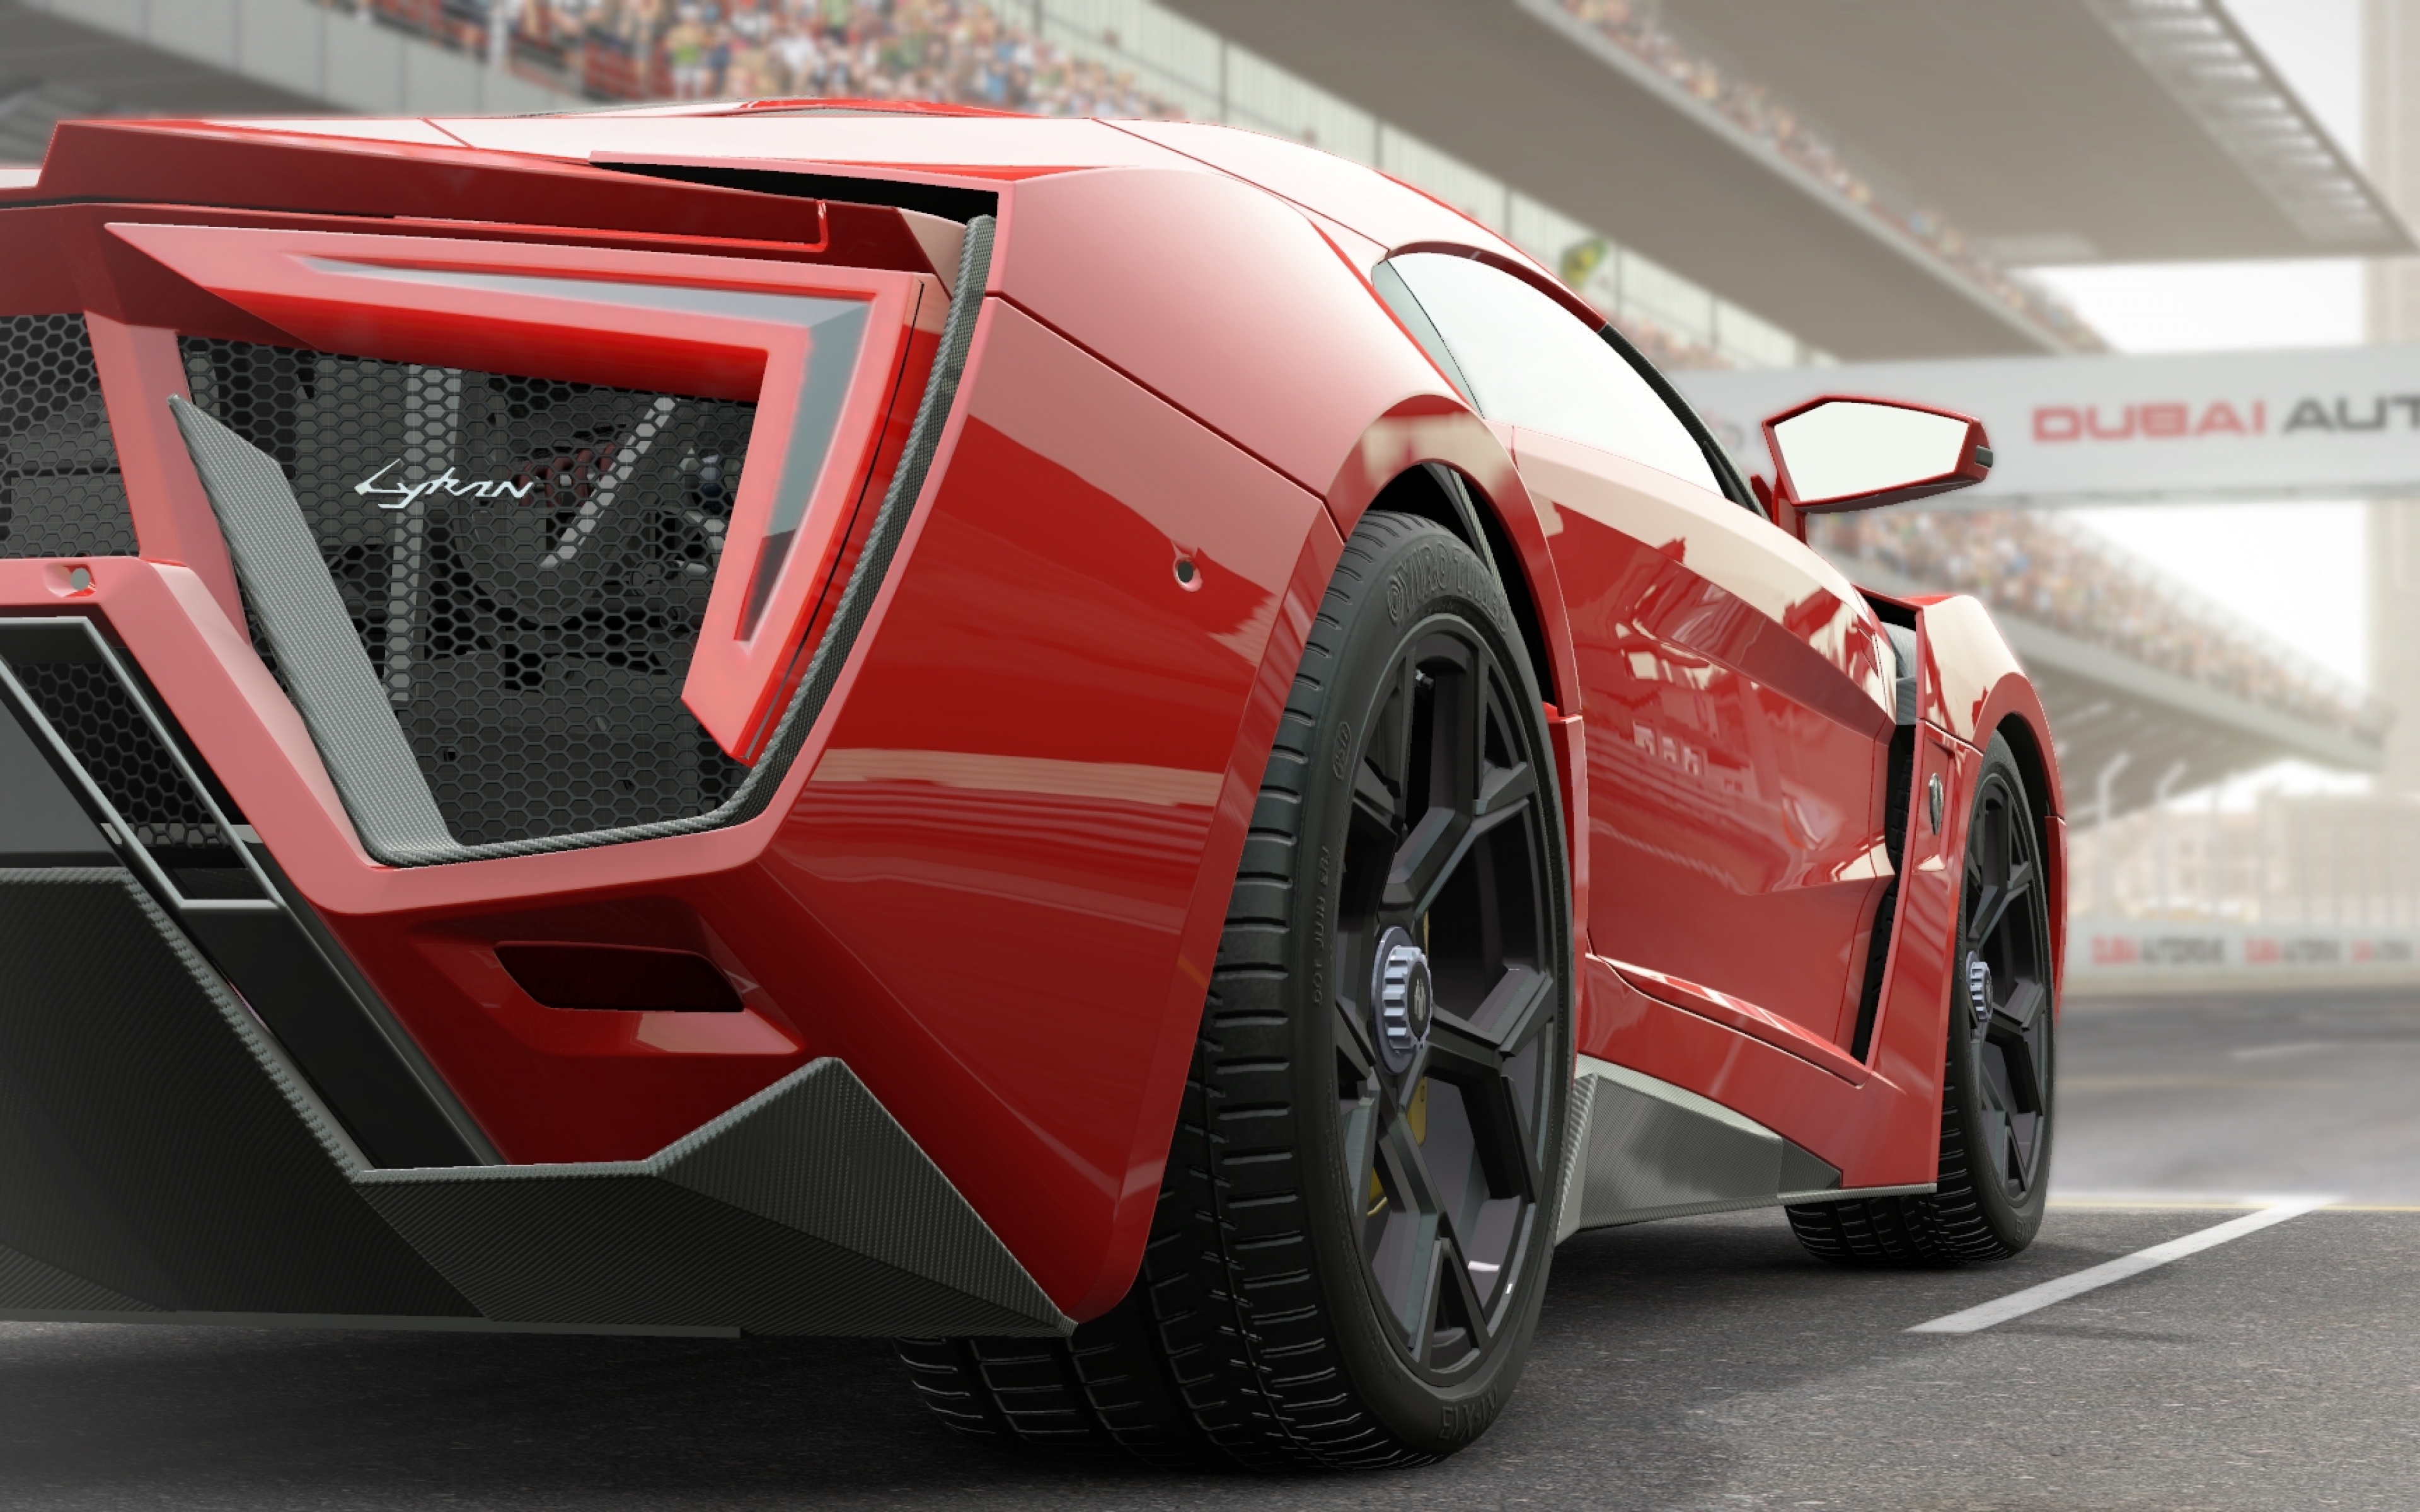 Hd Background Project Cars Lykan Hypersport Red Supercar - 4k Ultra Hd